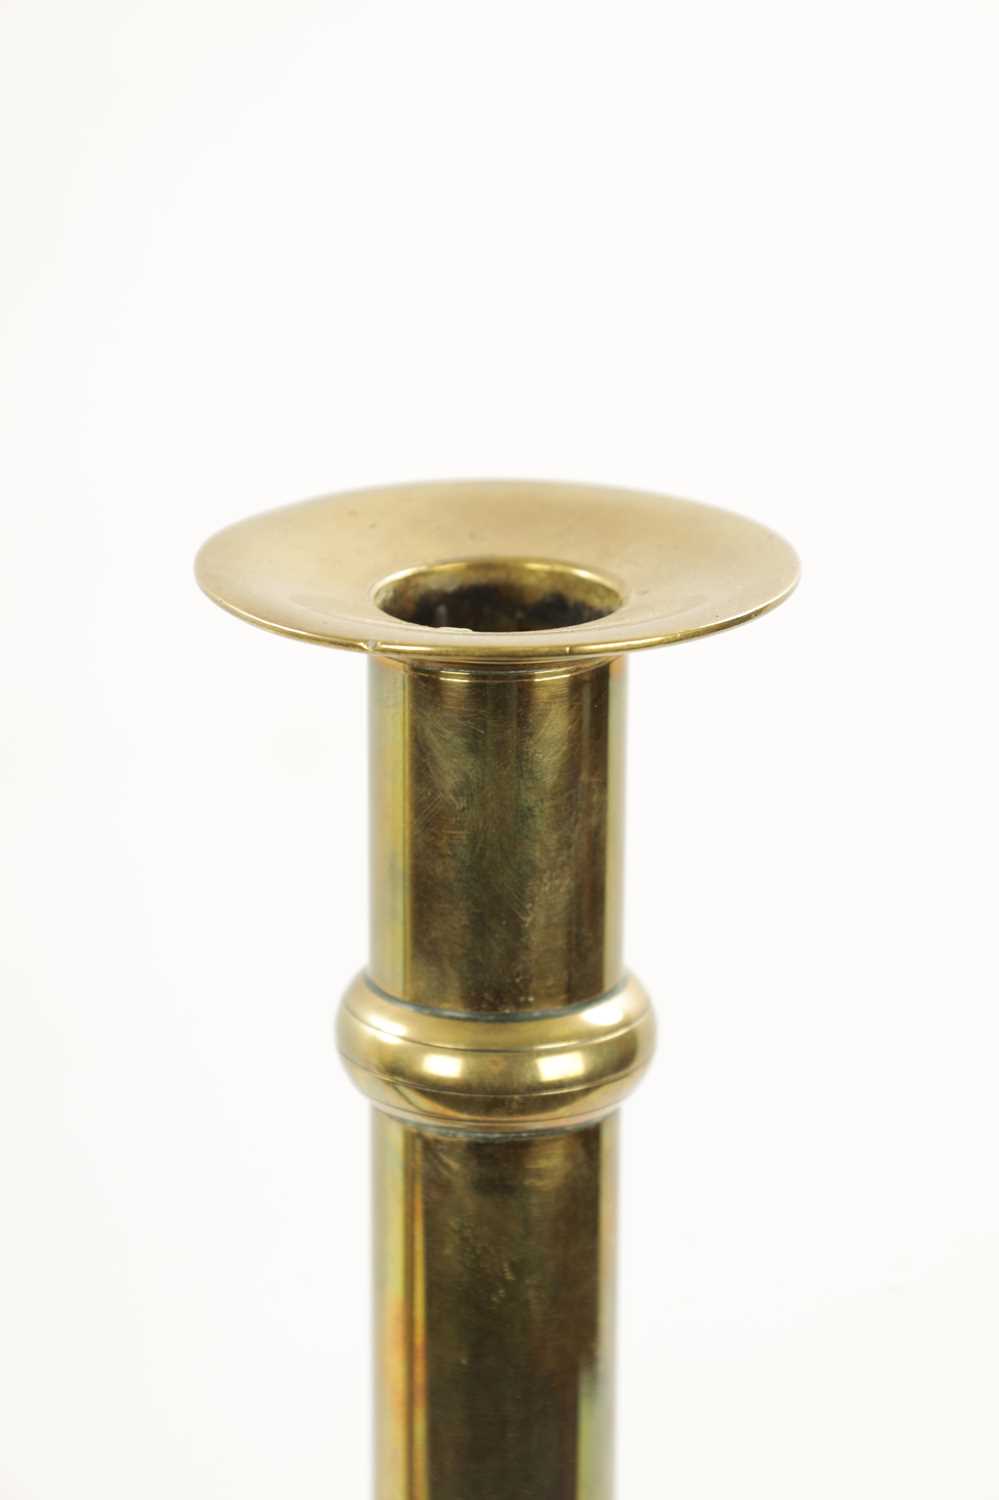 A PAIR OF LARGE 19TH CENTURY BRASS EJECTOR 'PULPIT' BRASS CANDLESTICKS - Image 2 of 7